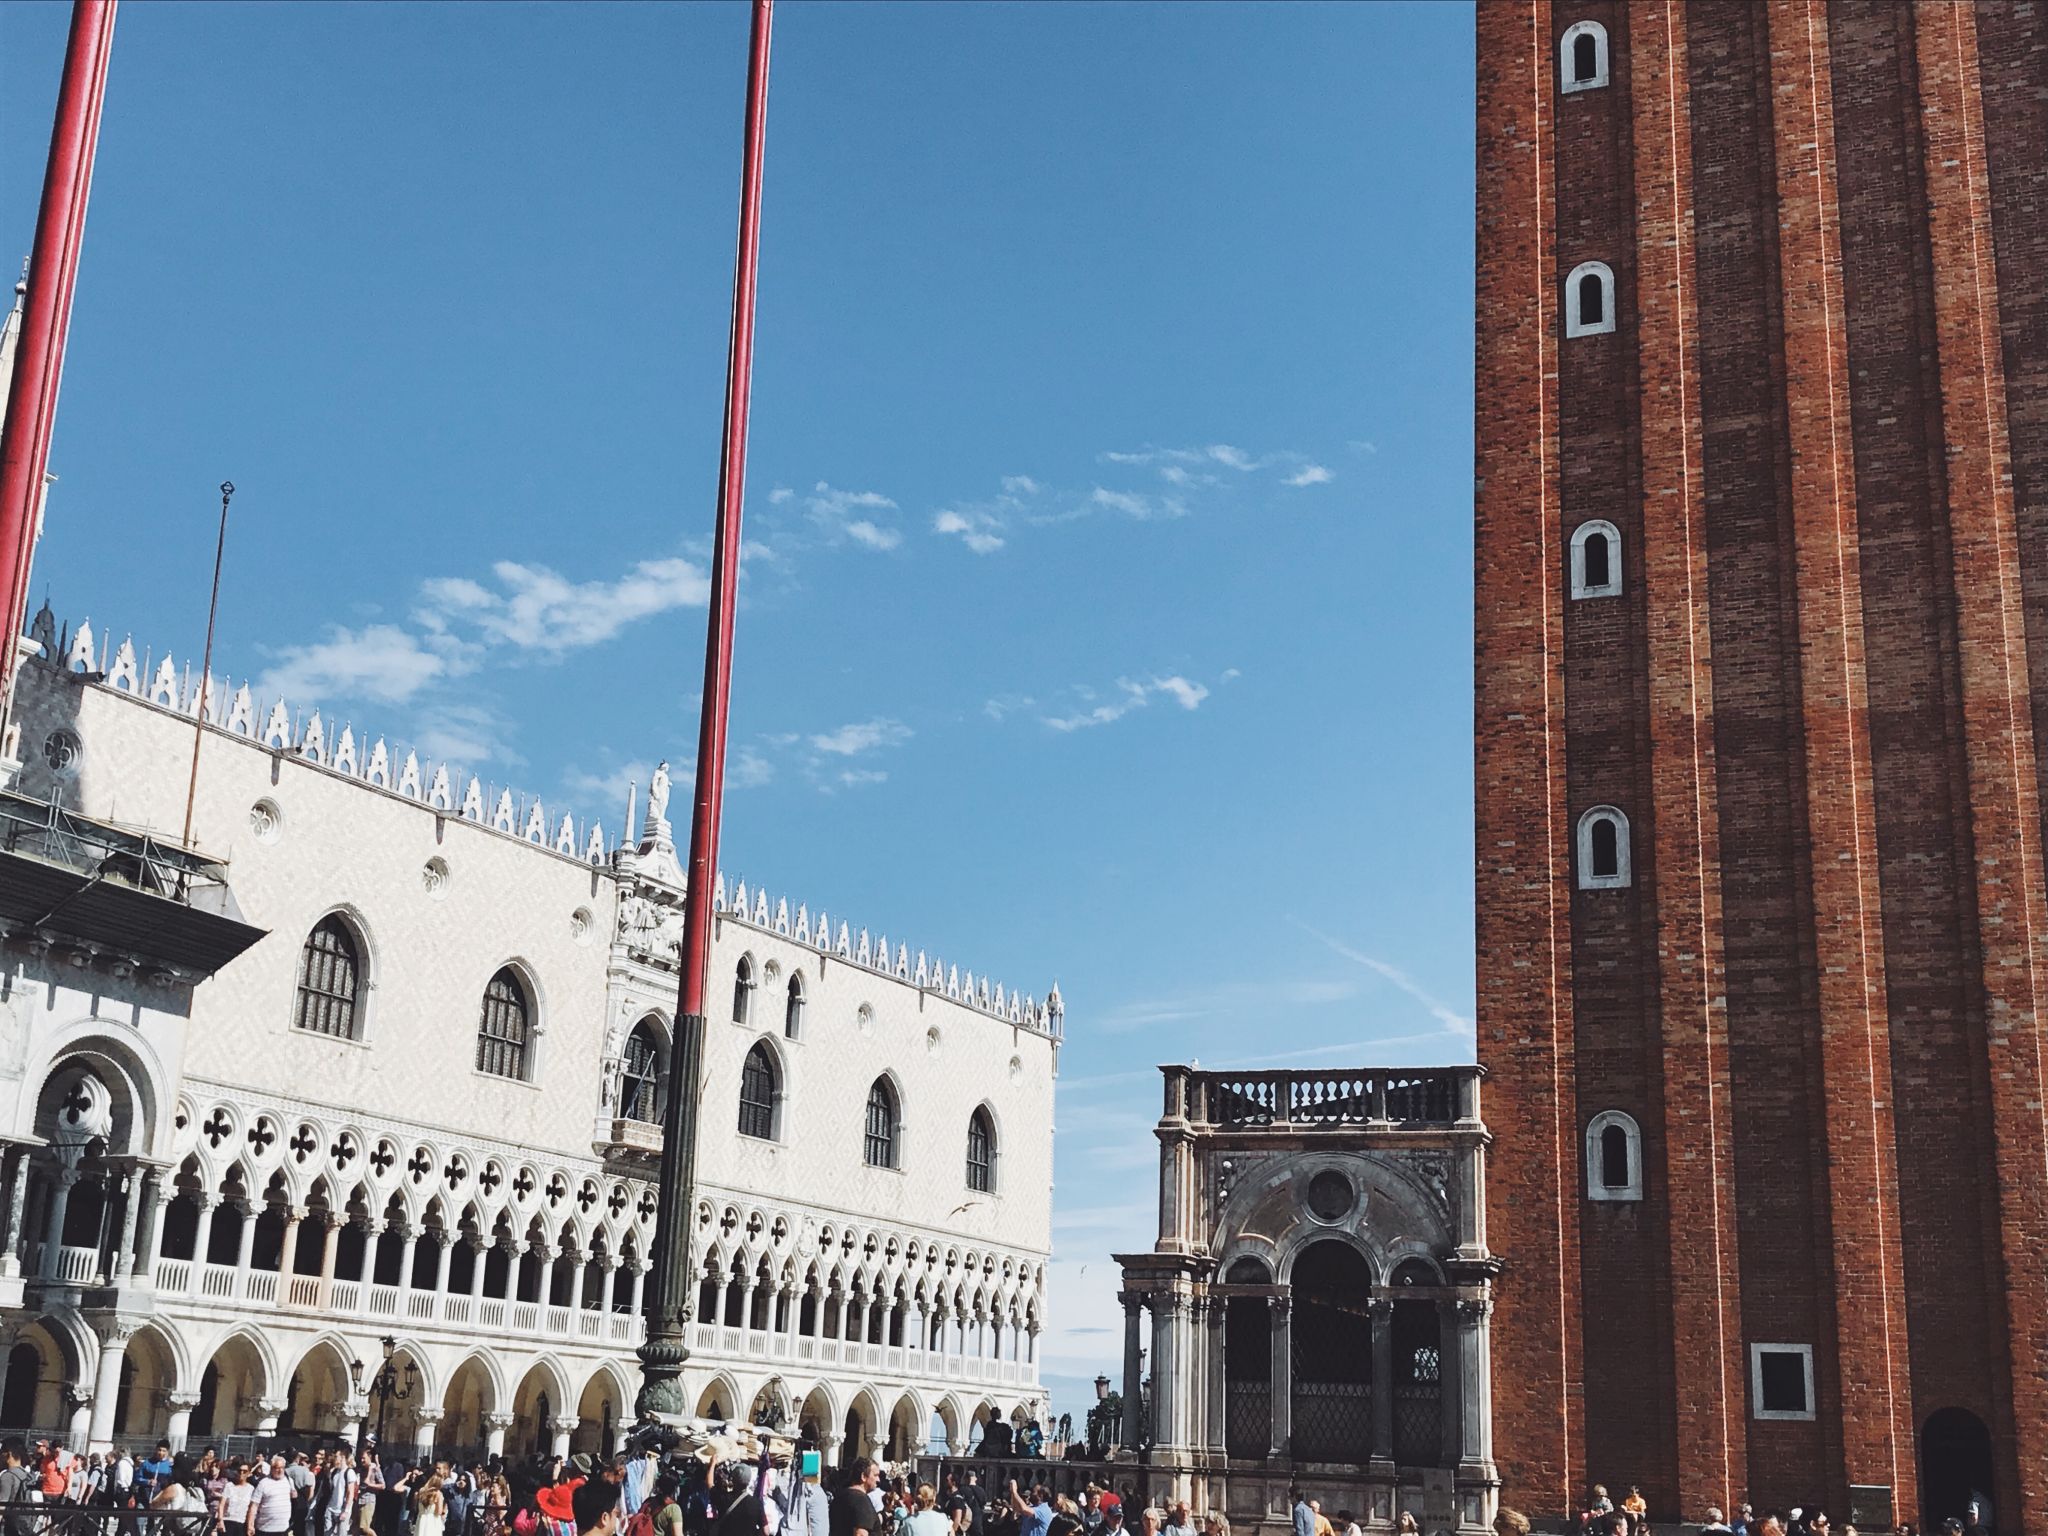 trips to venice - crowds at st marks square 